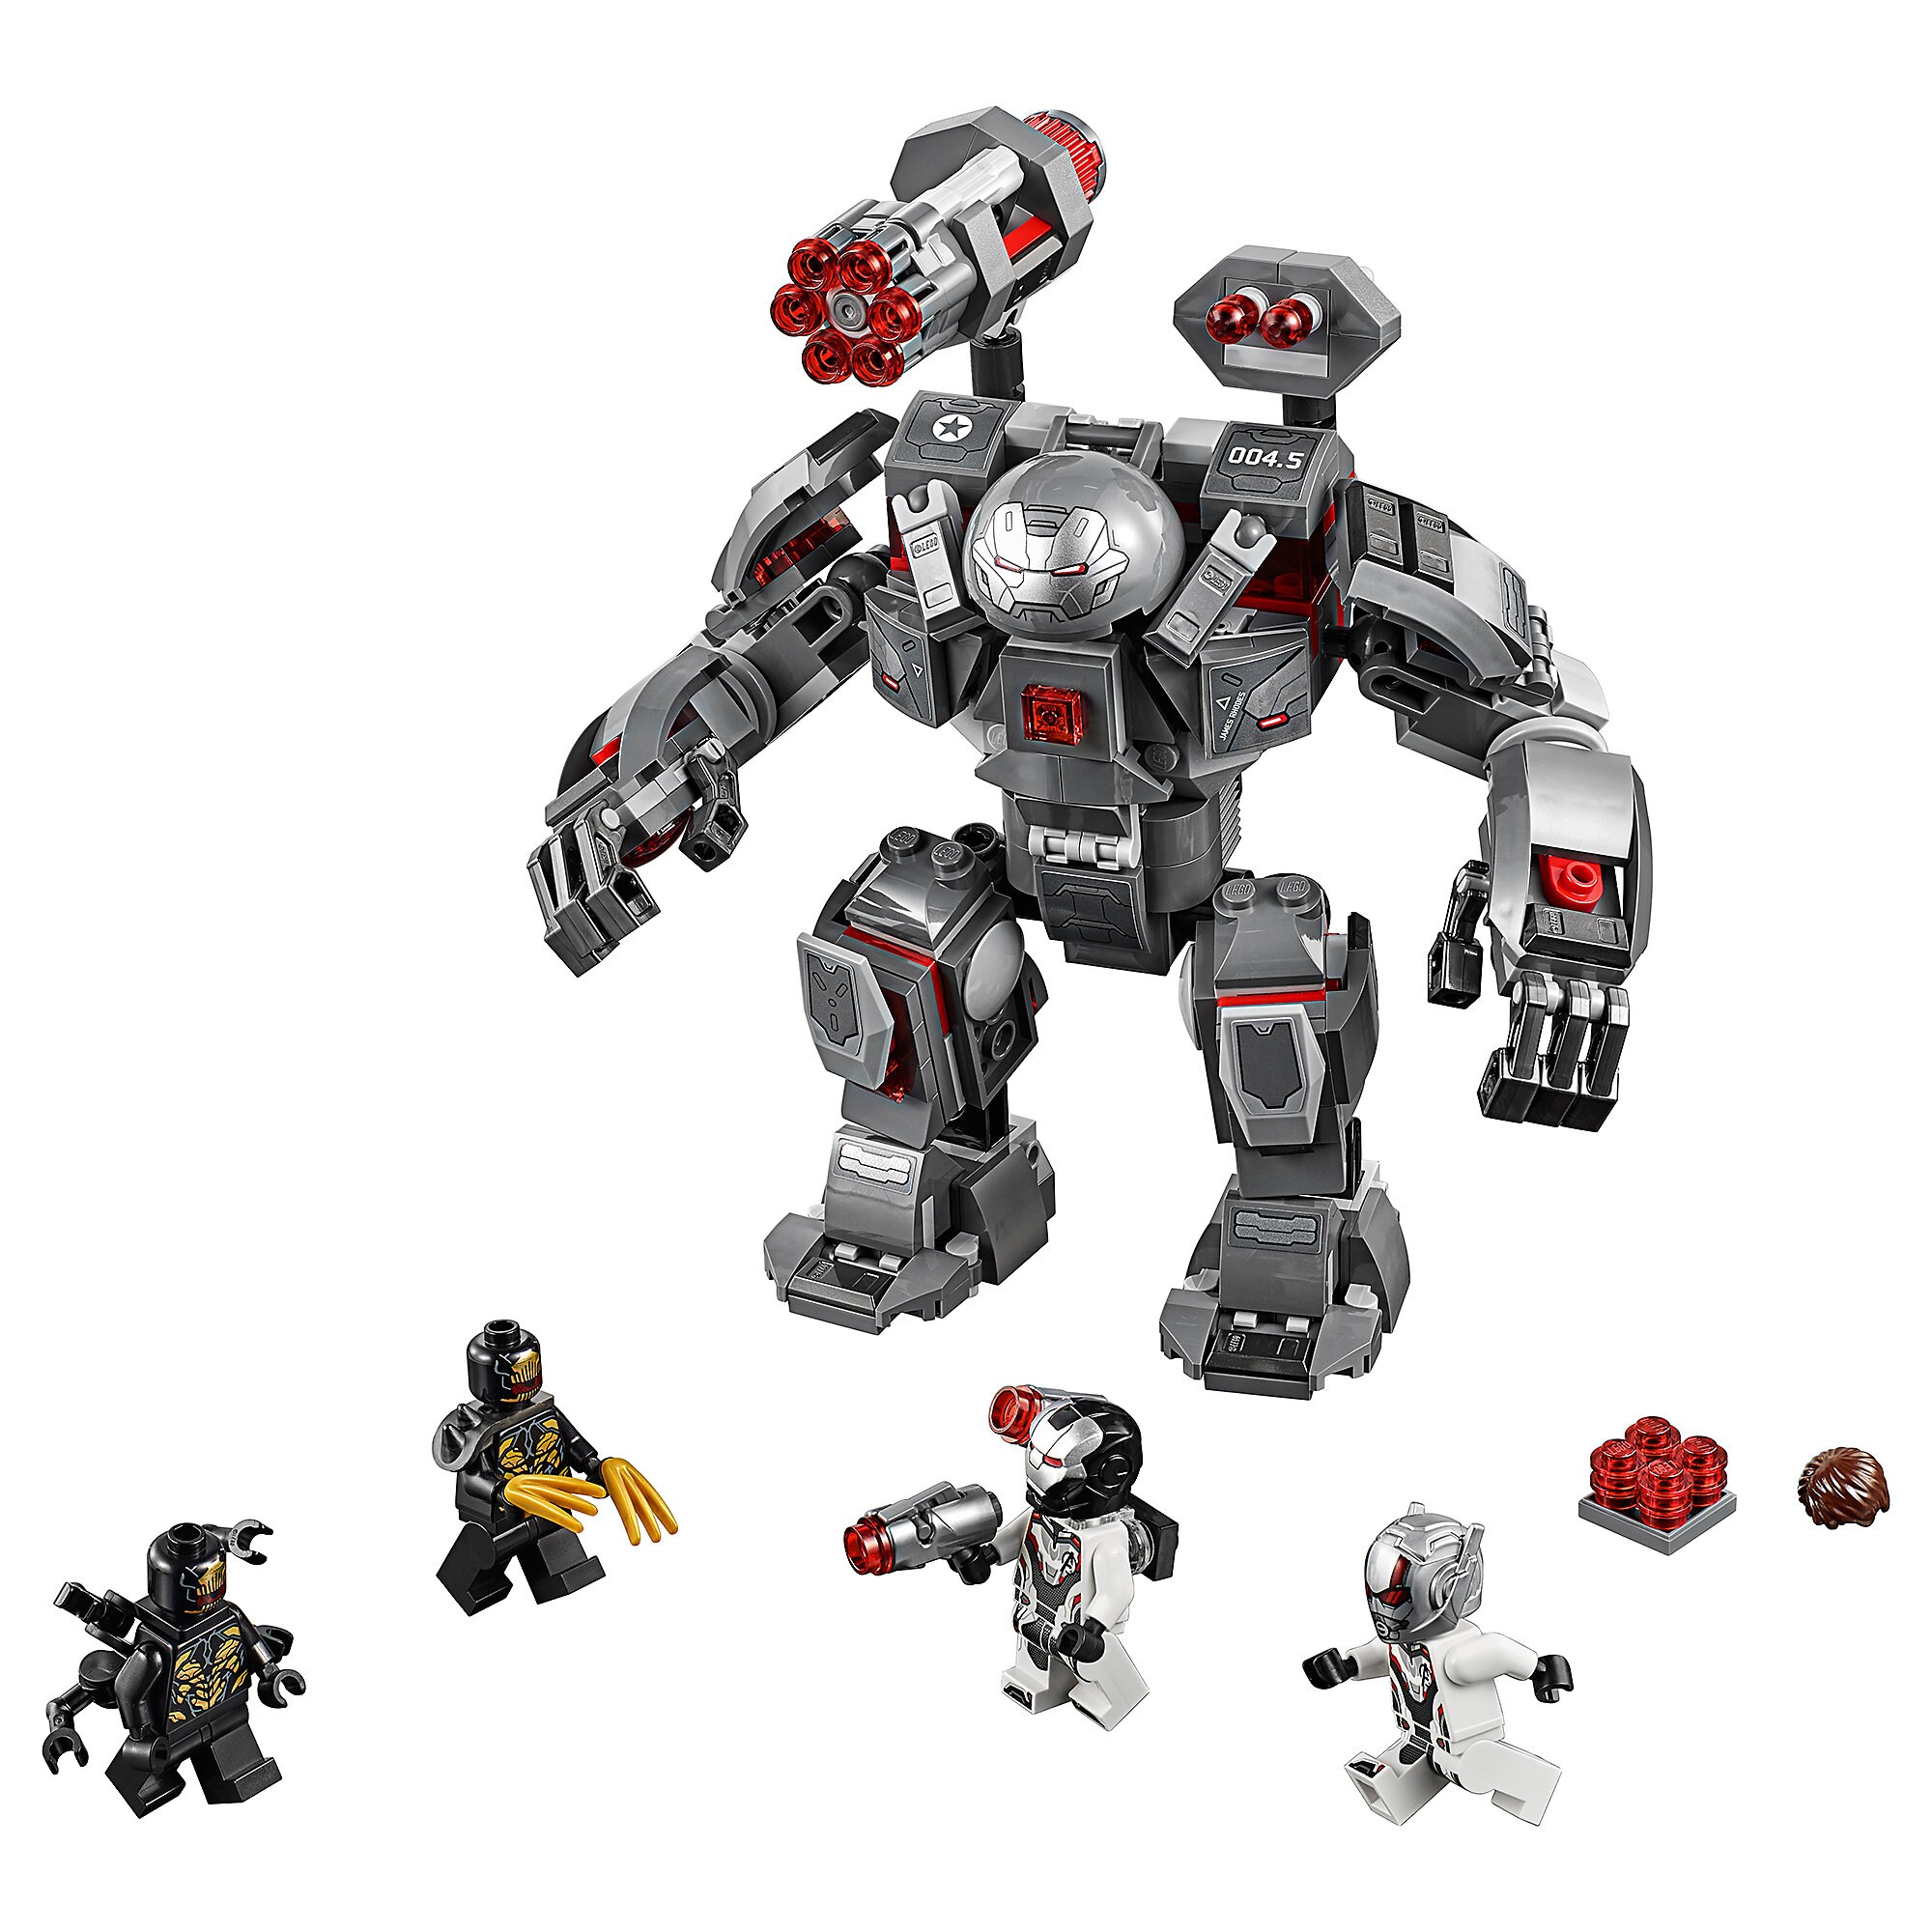 War Machine Buster Play Set by LEGO - Marvel Avengers